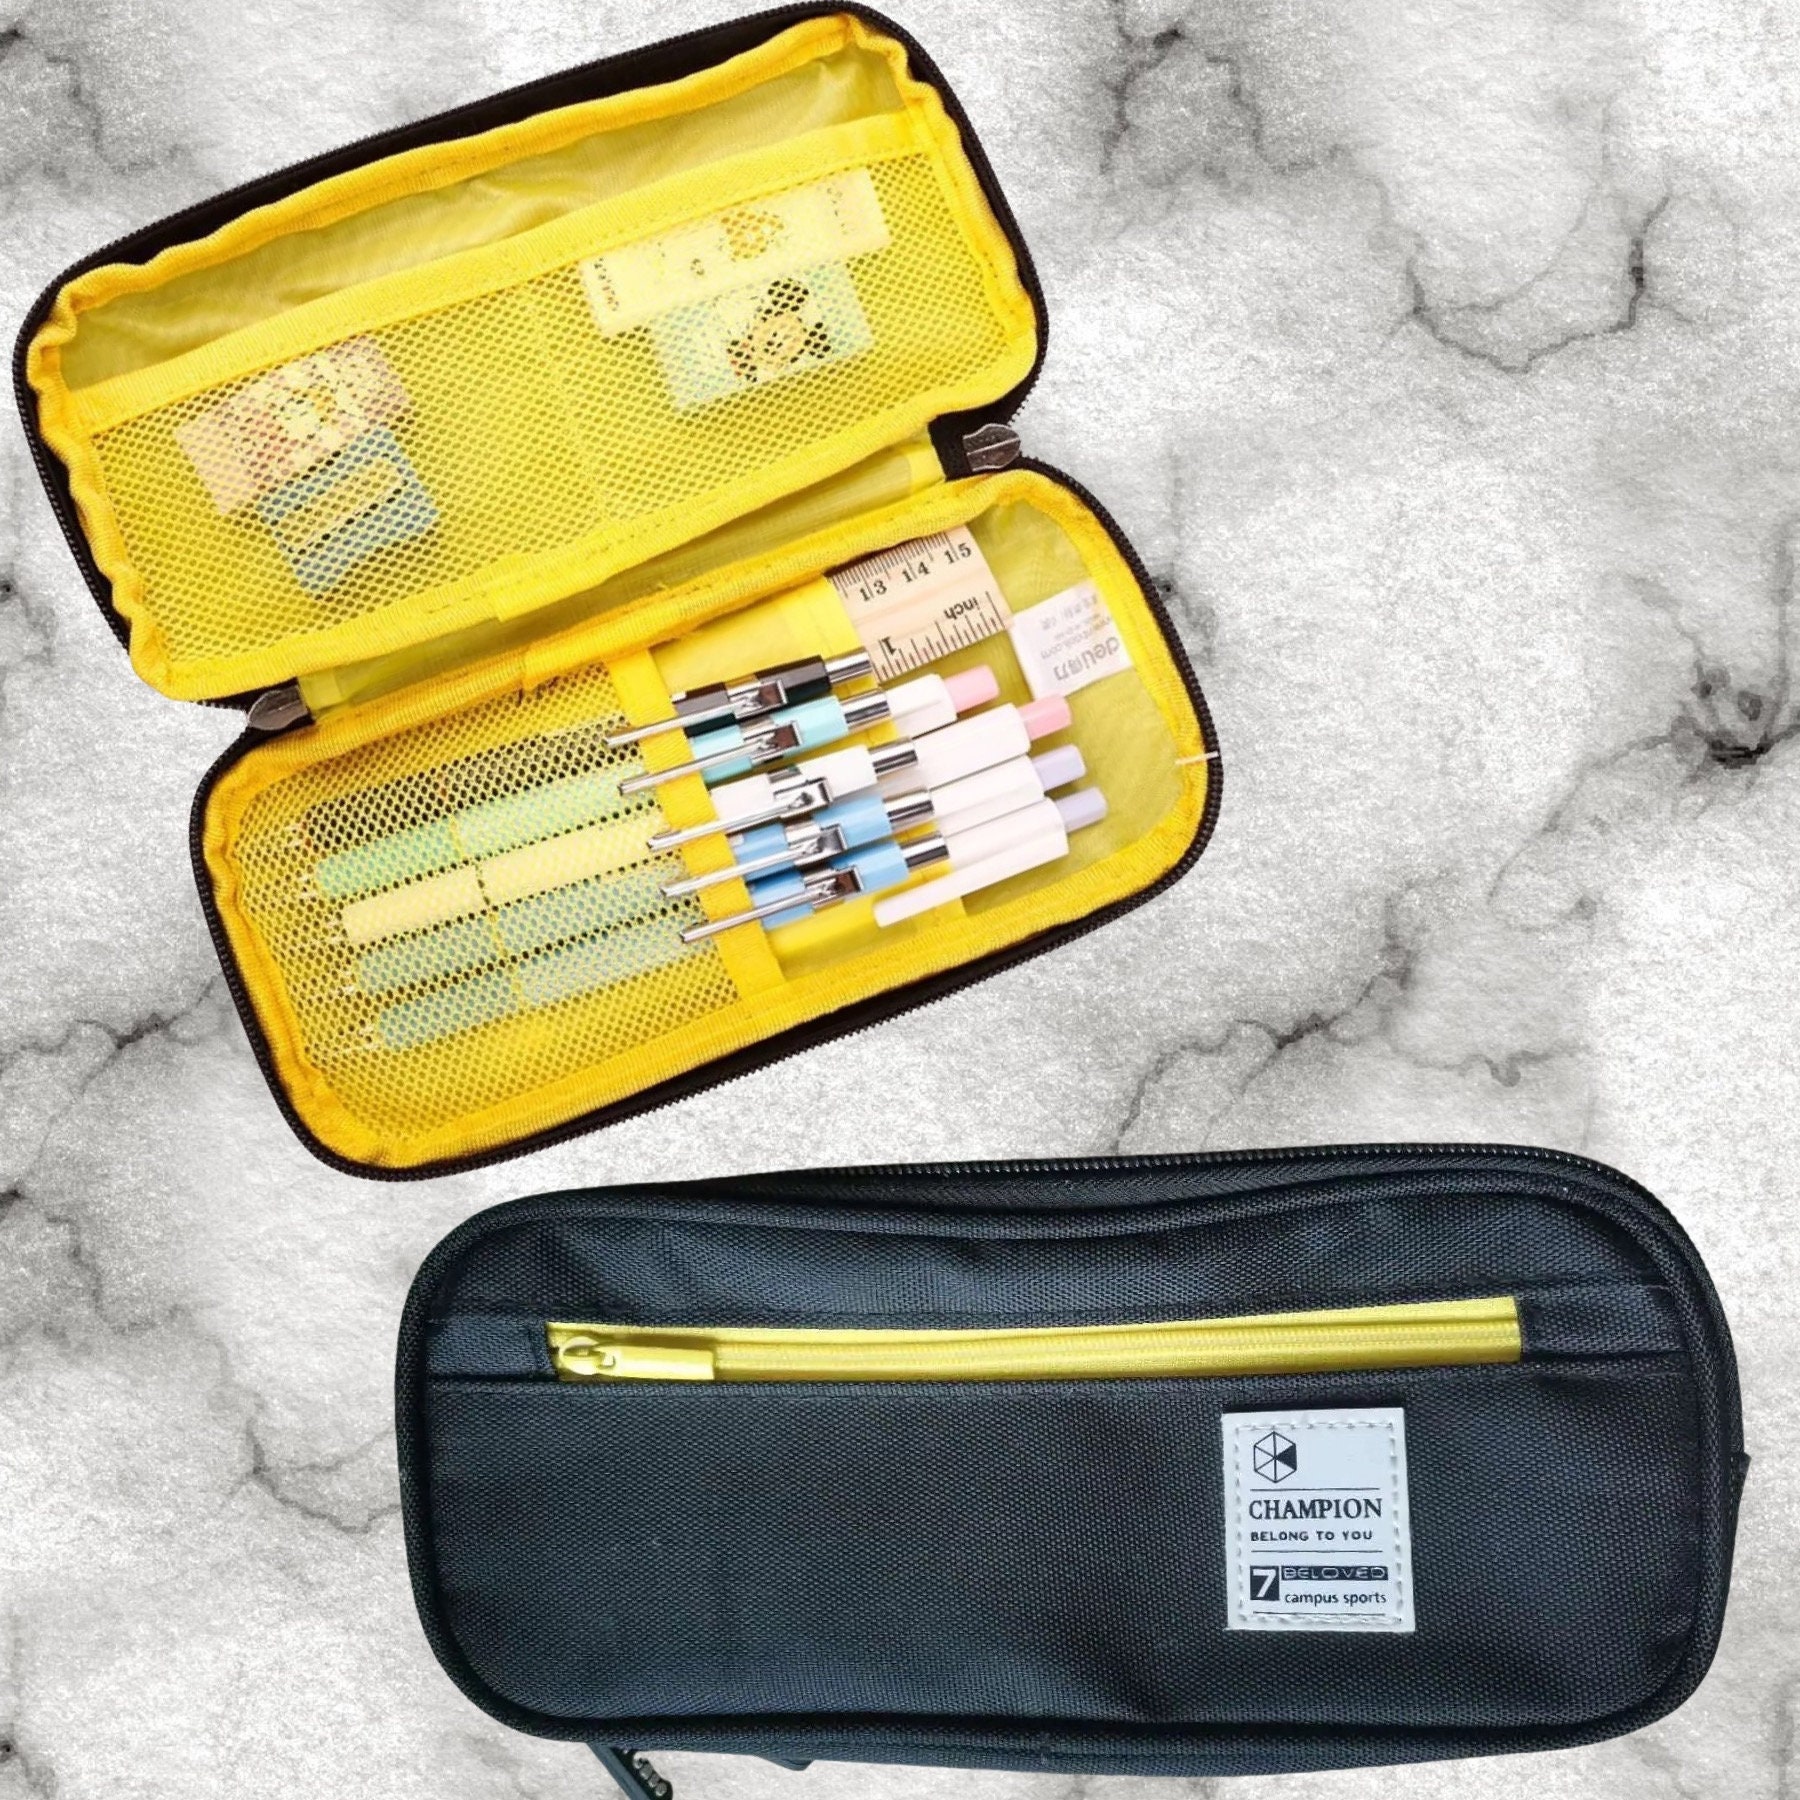 Black & Yellow Large Capacity Pencil Case, 3 Compartments to Store